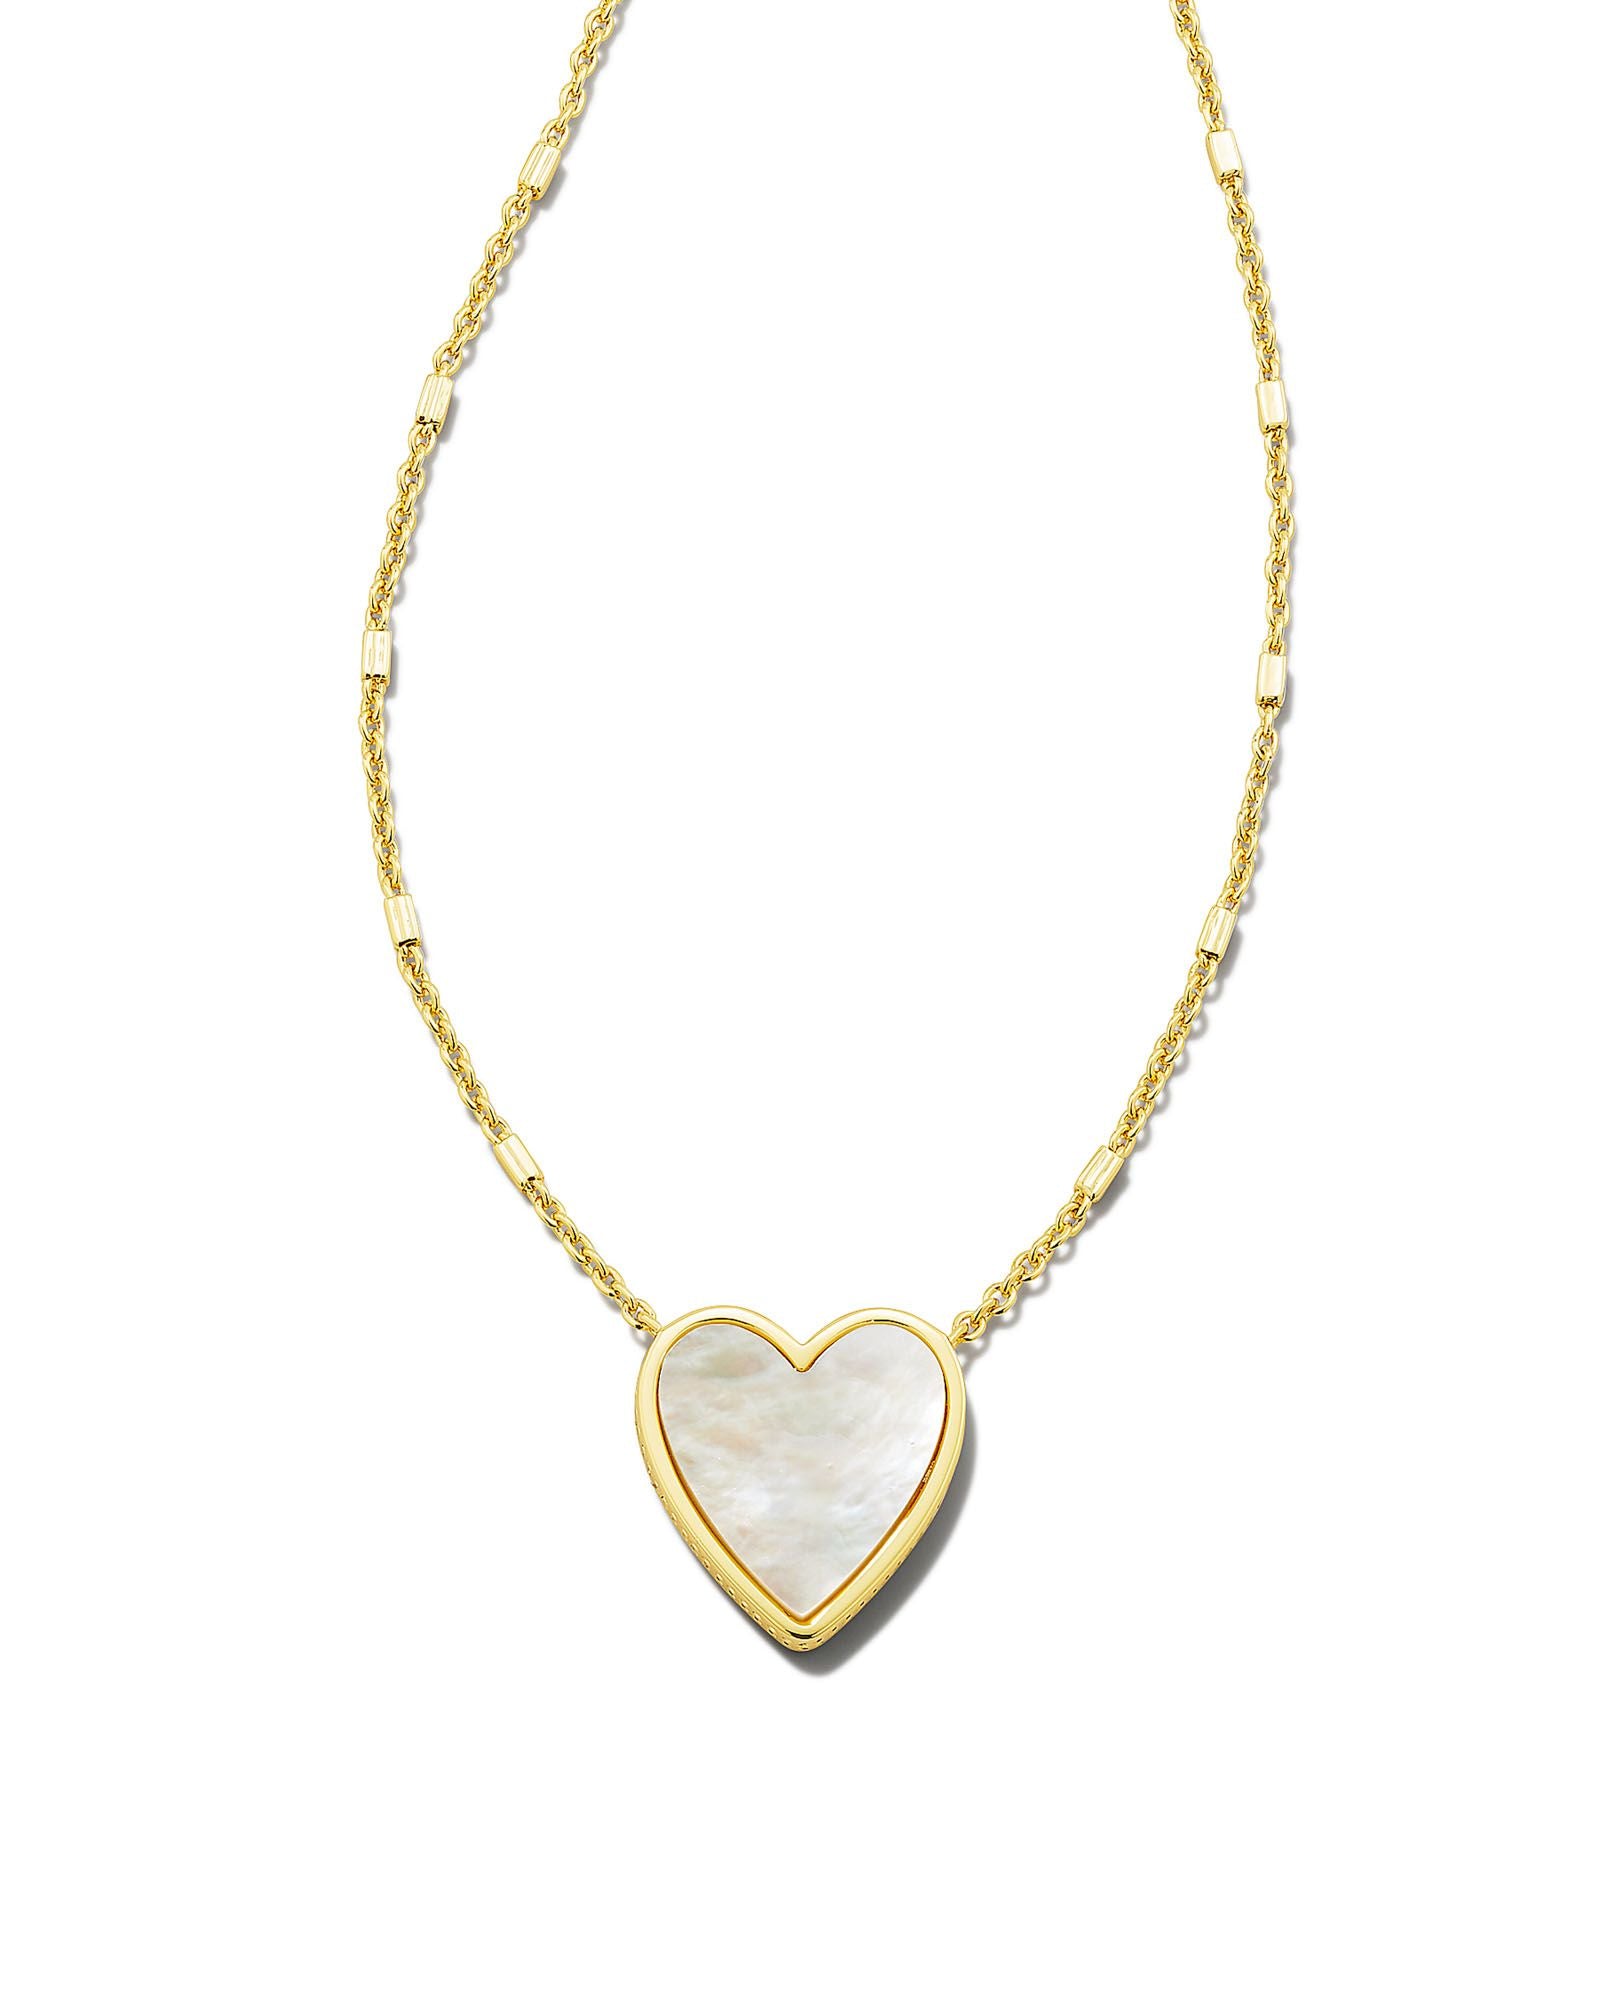 Heart Pendant Necklace in Gold Ivory Mother of Pearl